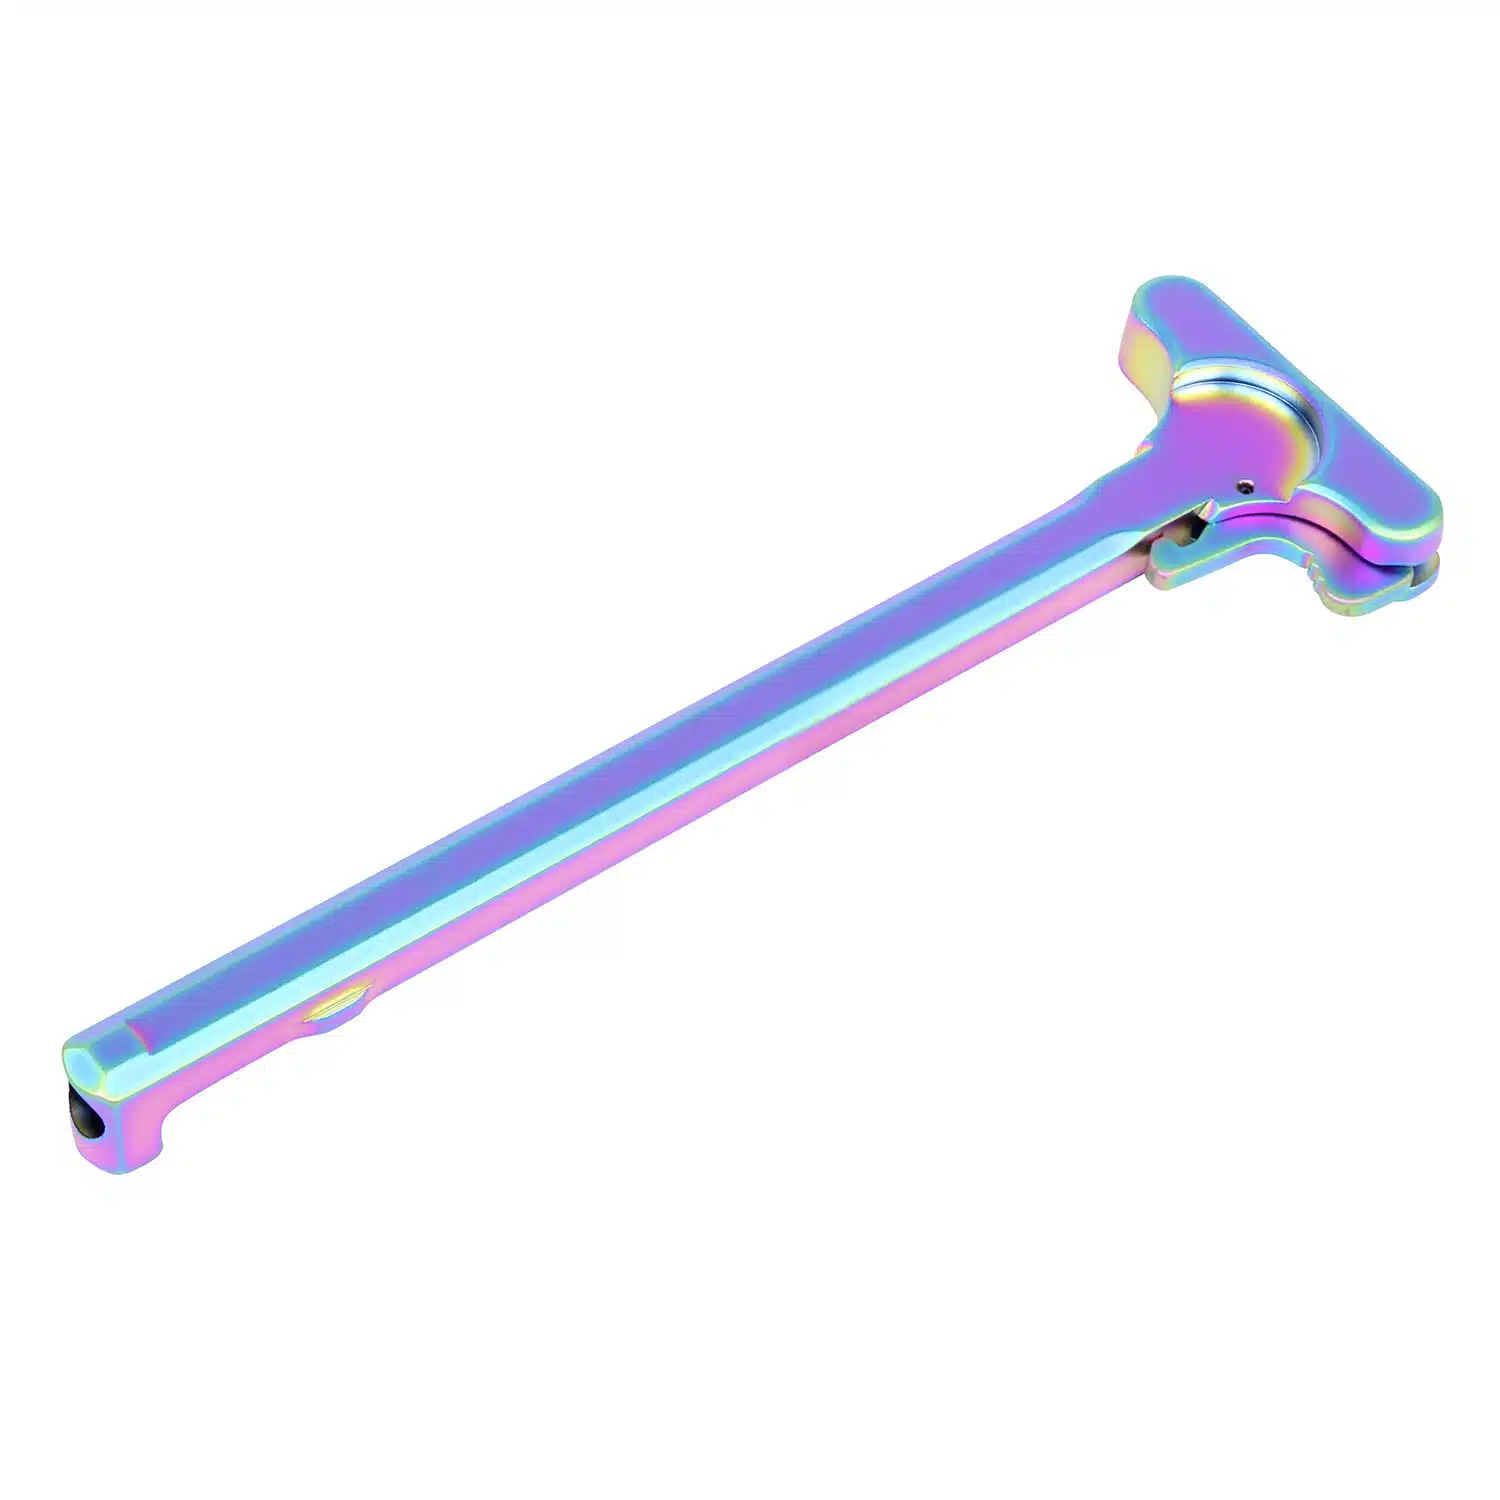 AR-15 Charging Handle in Matte Rainbow PVD